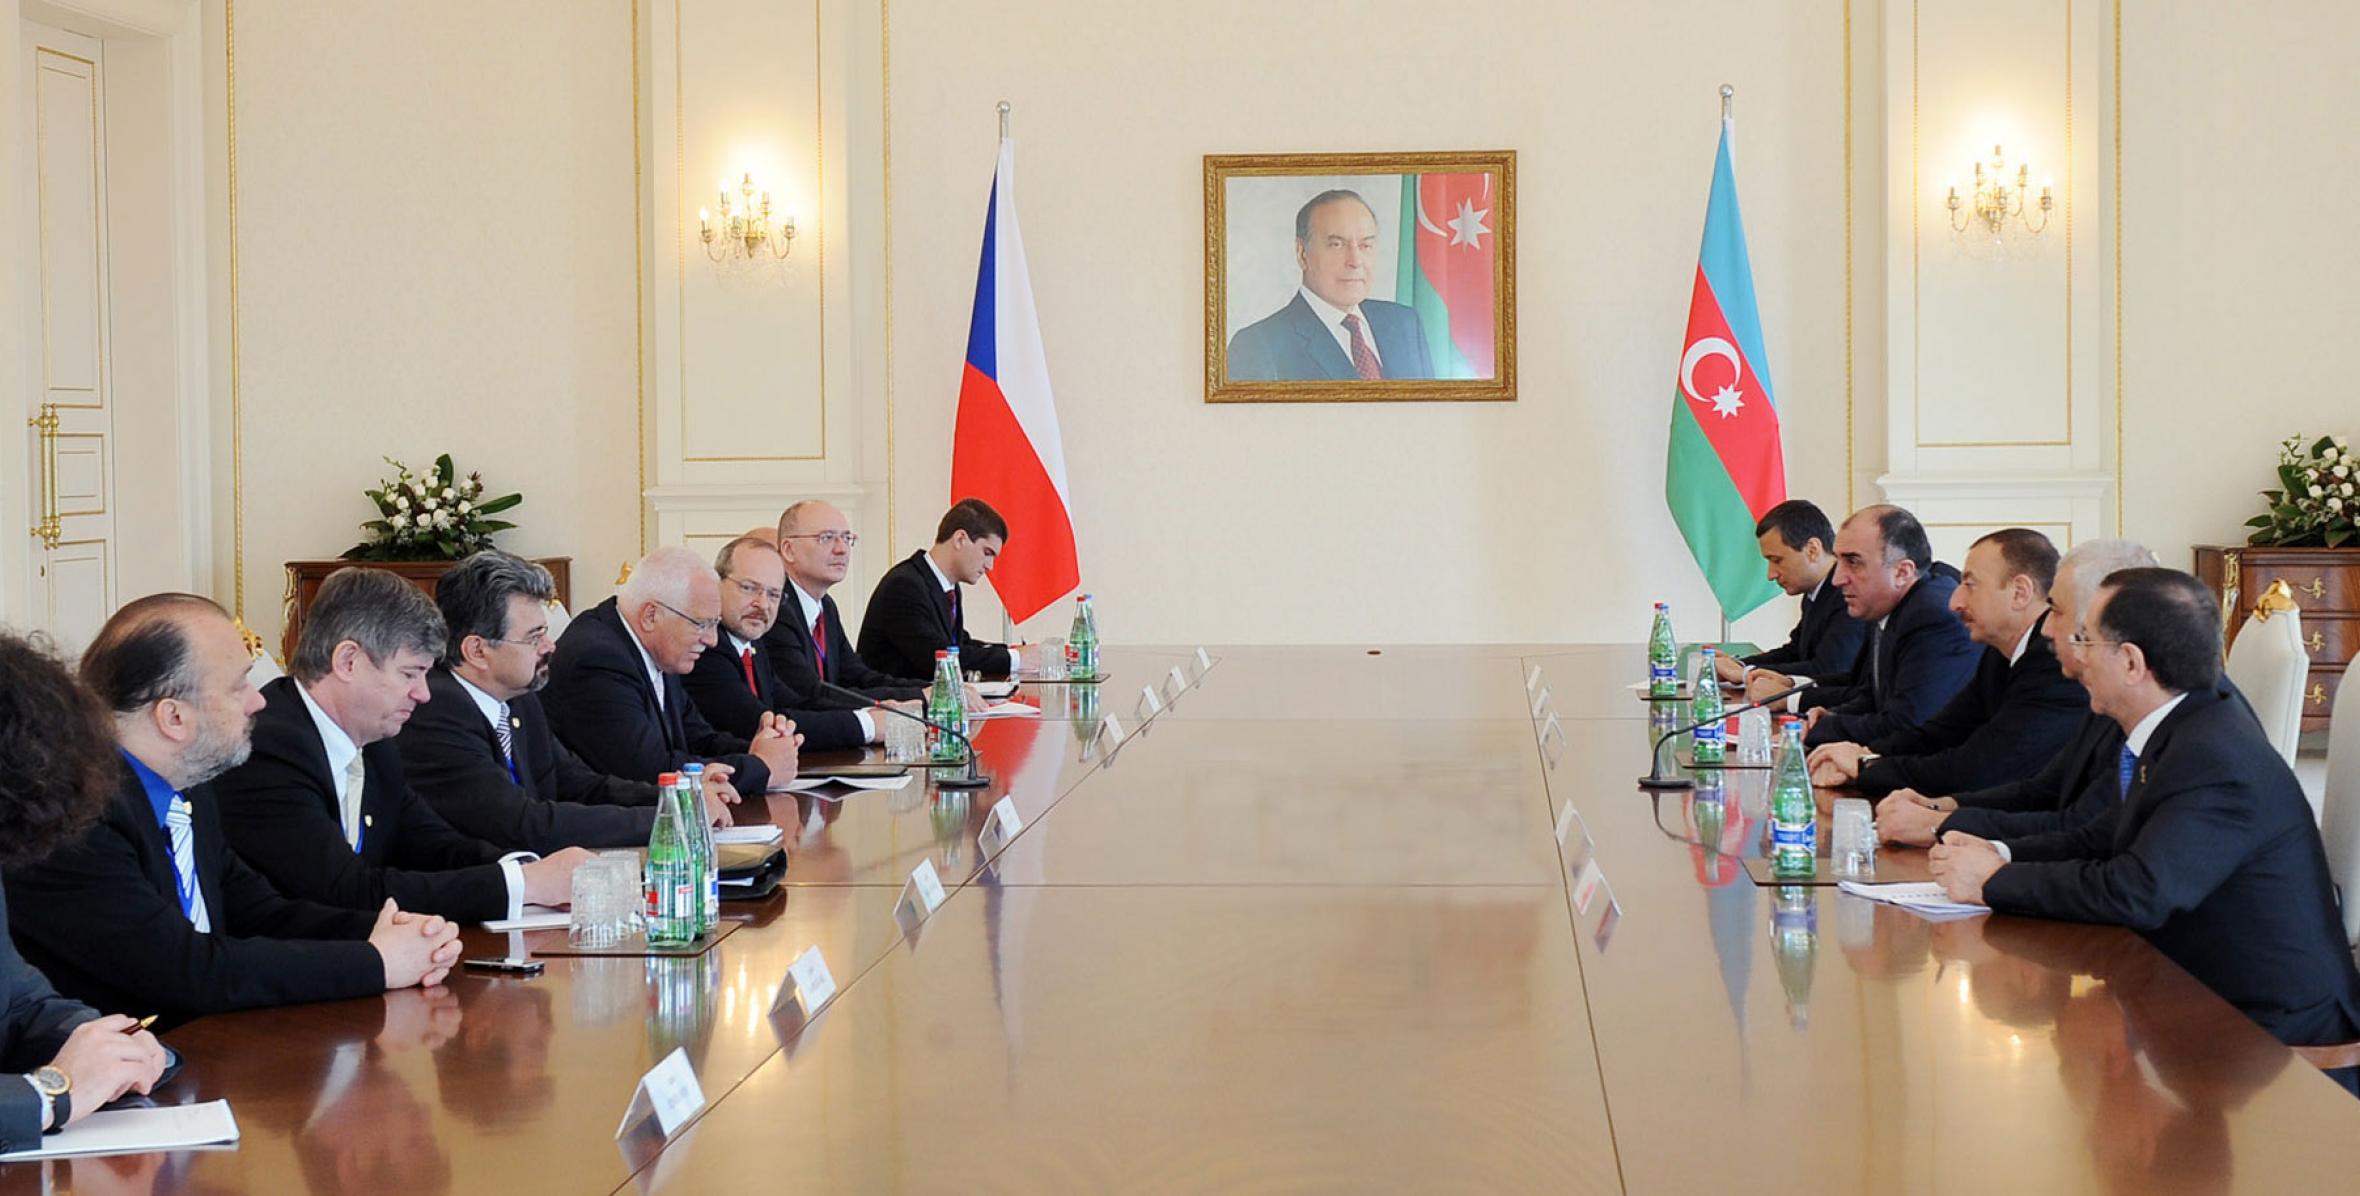 Ilham Aliyev and President of the Czech Republic Václav Klaus held an extended meeting in the presence of delegations